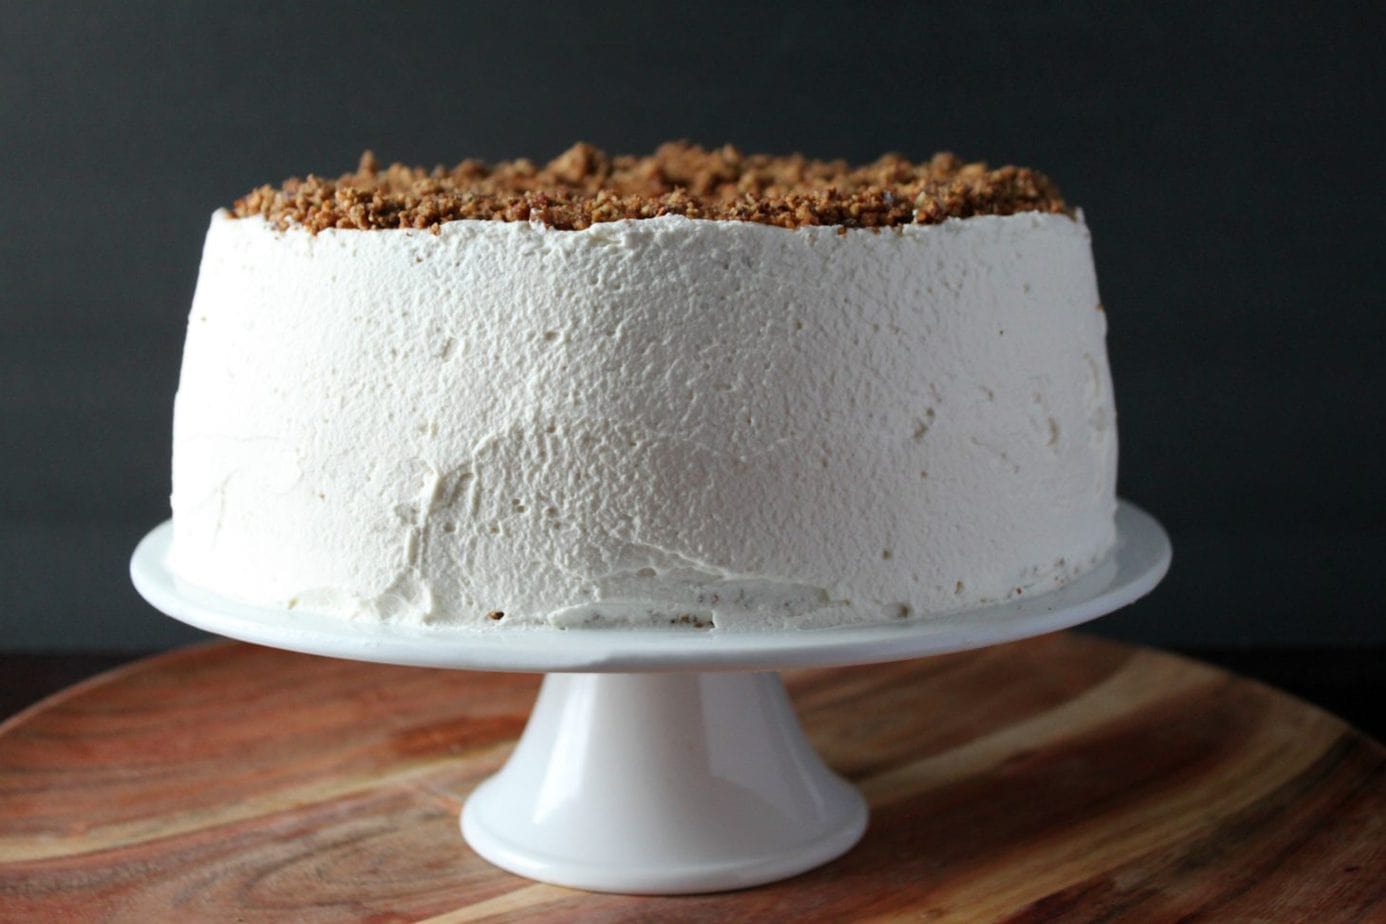 A soft n chewy pecan torte layered with sweetened whipping cream